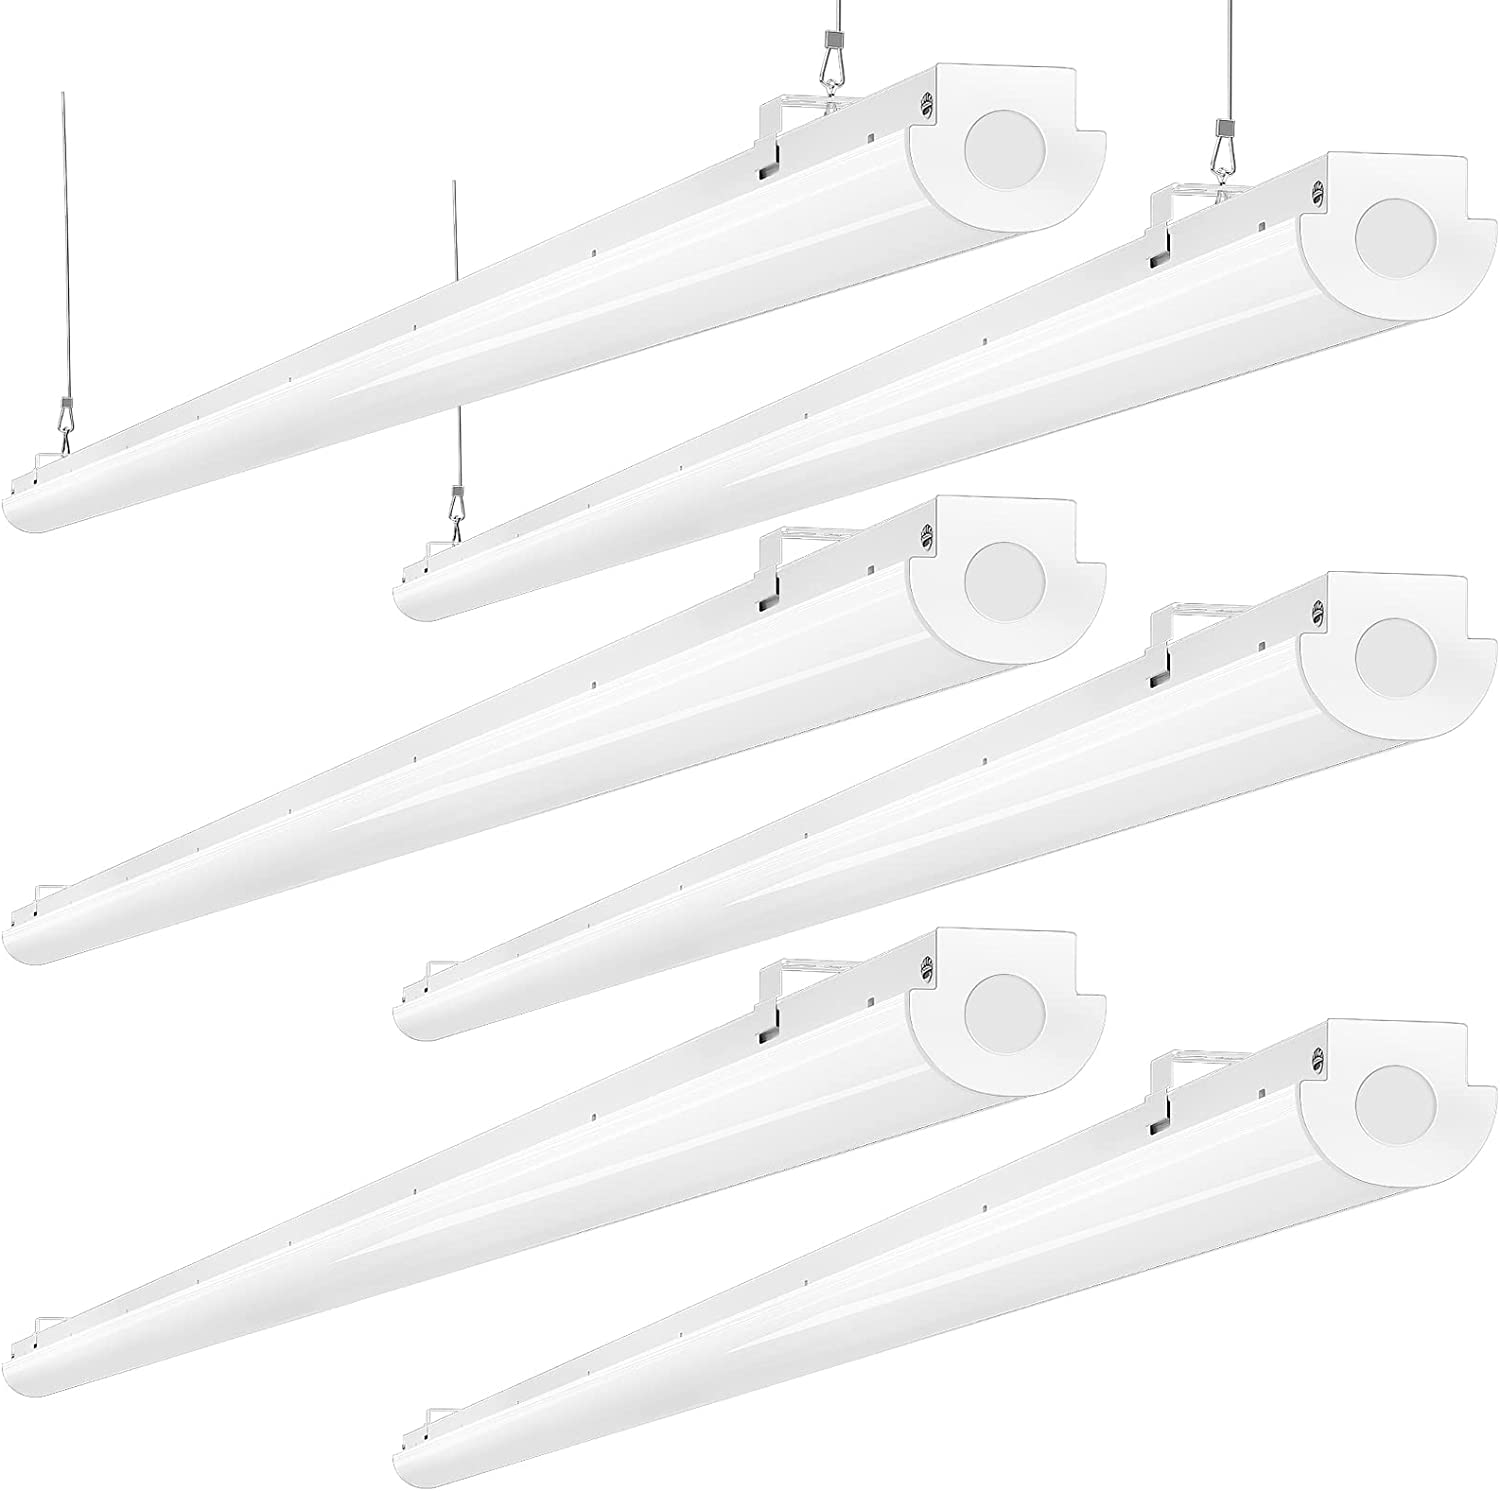 ANTLUX 8FT LED Shop Lights 110W Strip Lights [6-lamp T8 Fluorescent Equiv.], 12000LM, 5000K, Compact Commercial 8 Foot Light Fixtures for Warehouse, Garage, Energy Saving up to 4000W/5 Years, 6 Pack